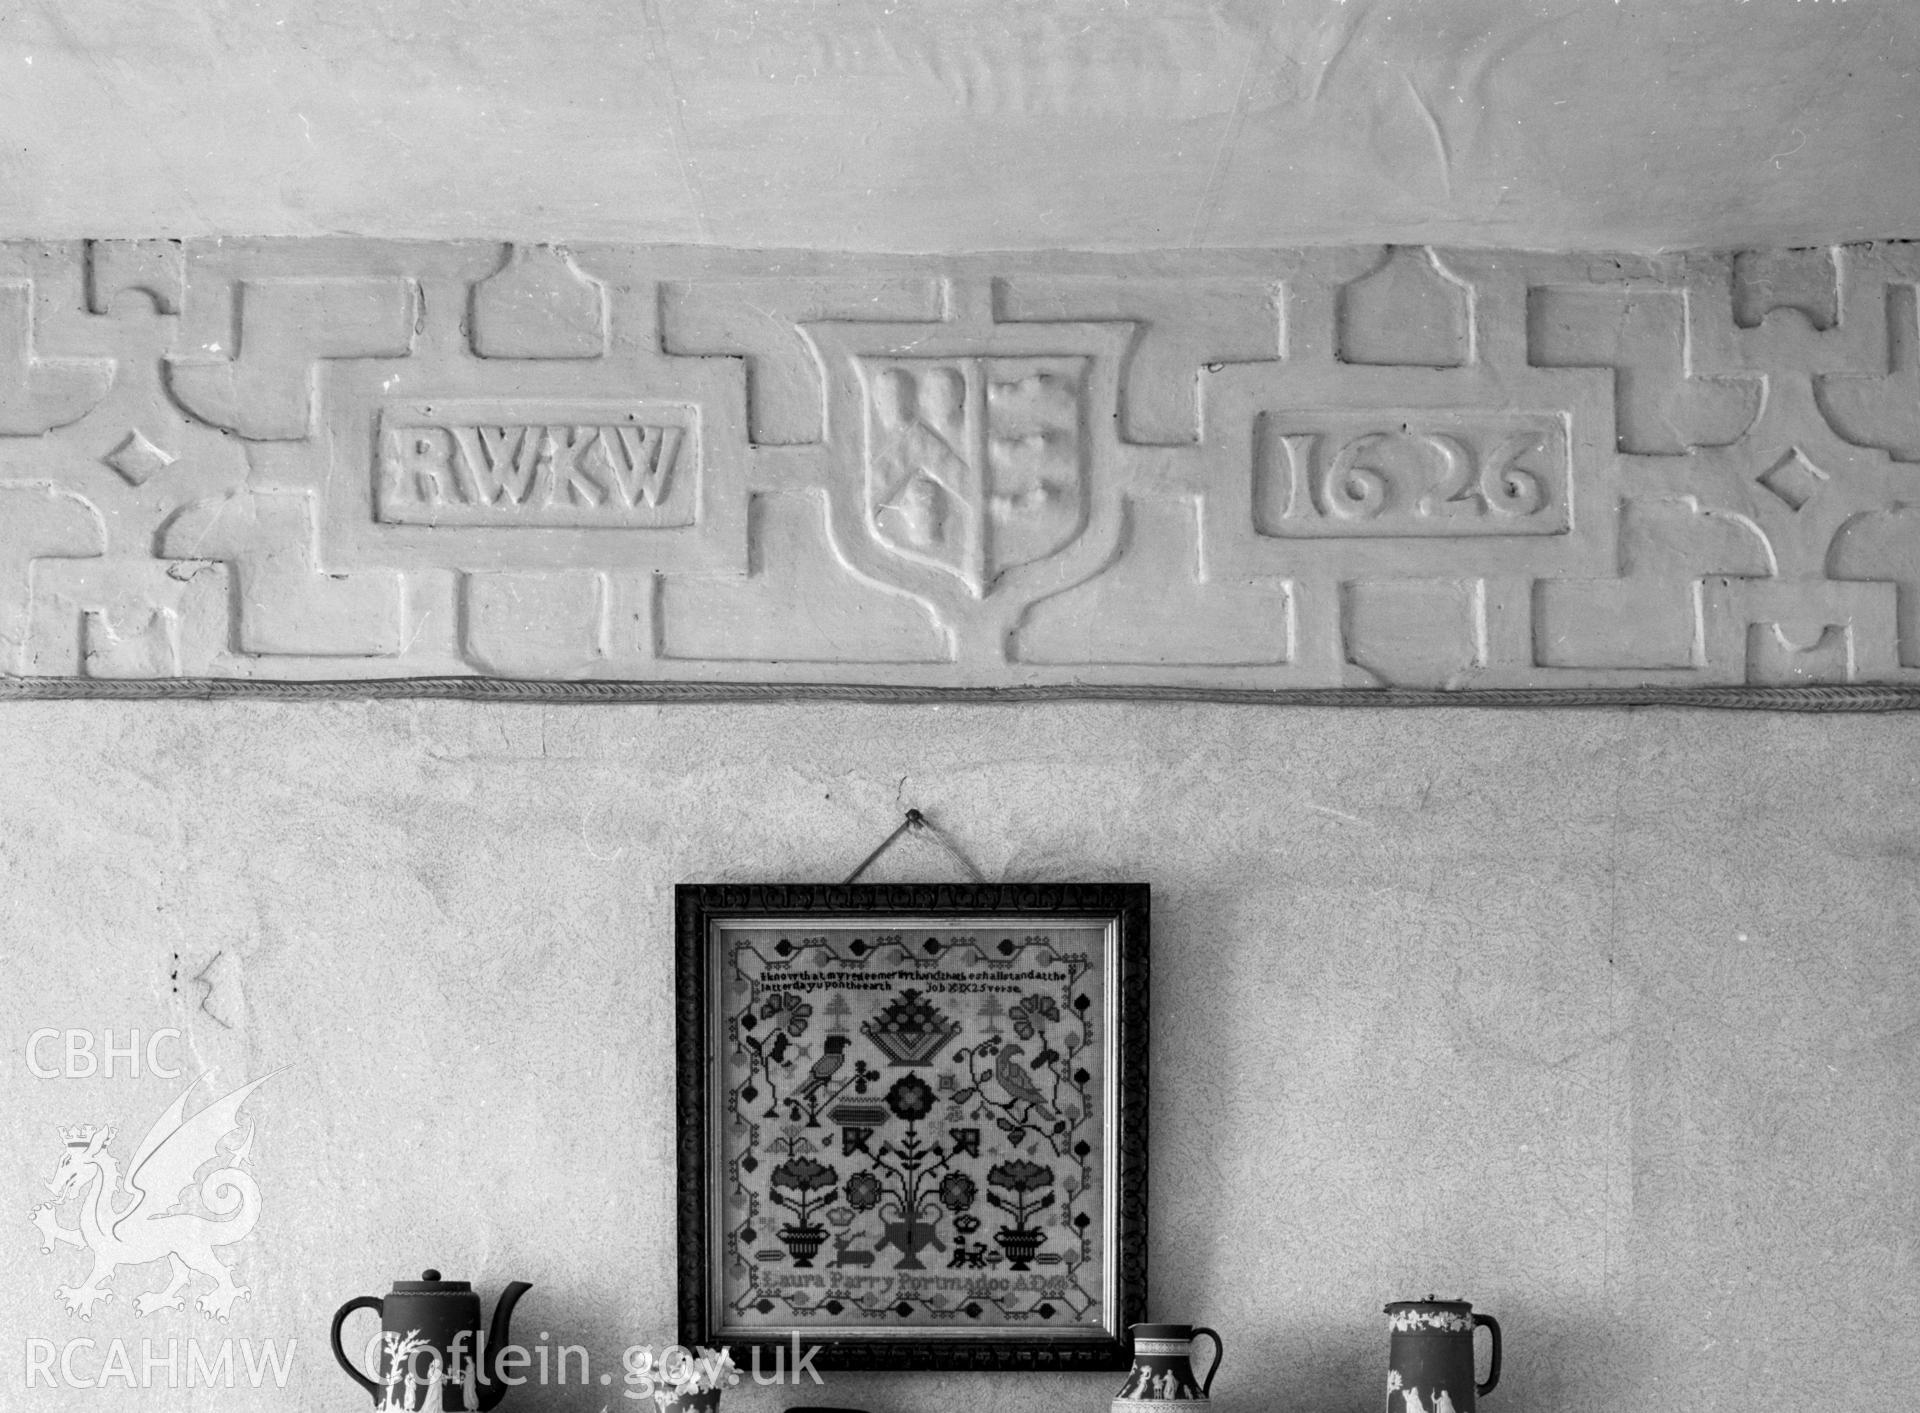 Plasterwork over fireplace showing a coat of arms, the letters RWKW and the date 1626.